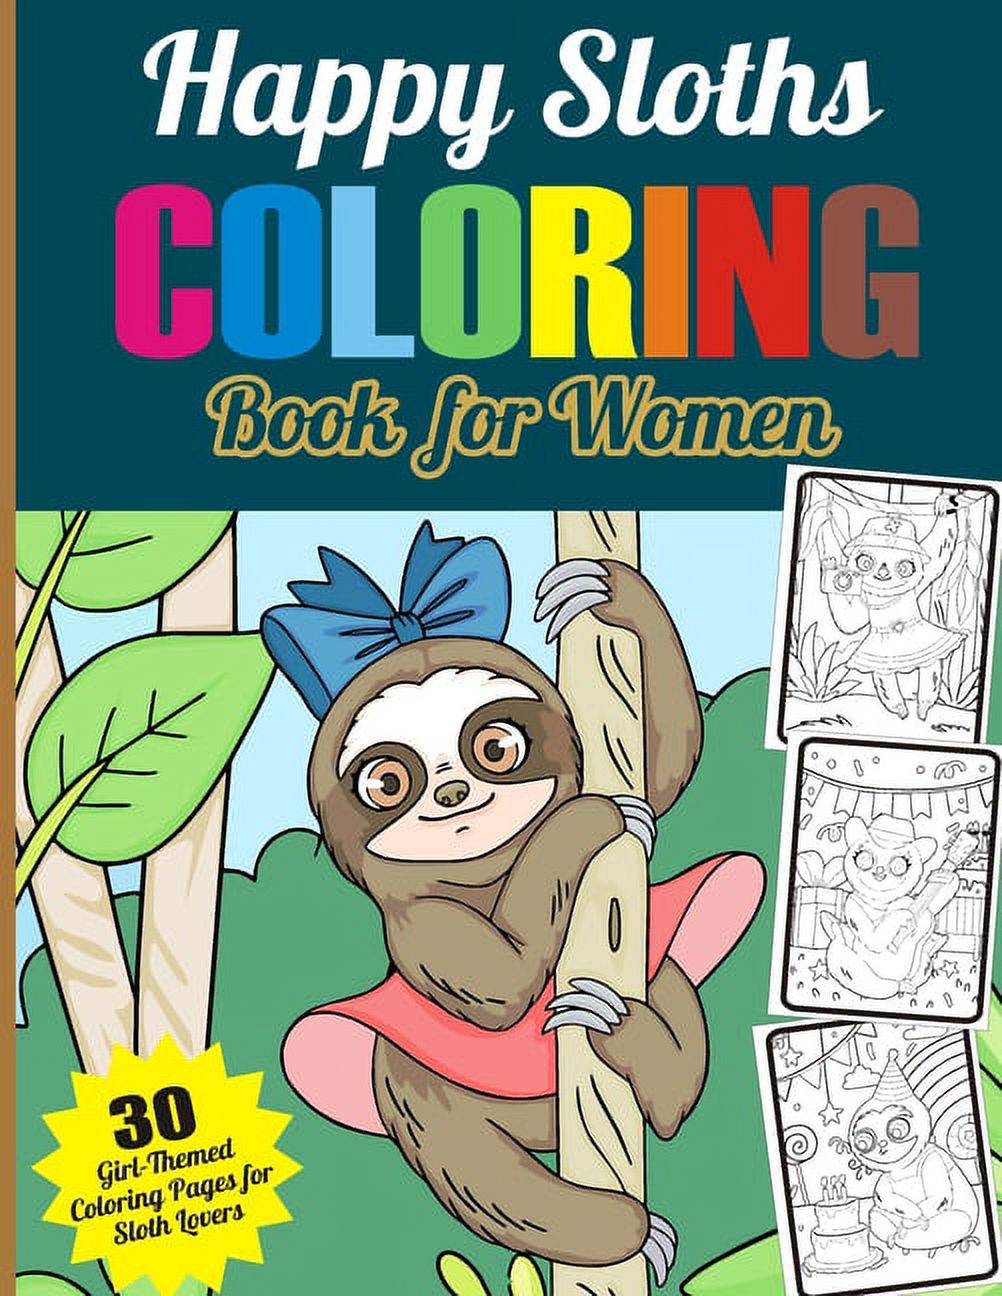 Happy Sloth Coloring Book for Women: 30 Girl-Themed Sloth Coloring Pages for Sloth Lovers Cute Sloths, Lazy Sloths, Adorable Sloths, Funny Sloths, Silly Sloths Coloring Book for Young Girls That Will - image 1 of 1